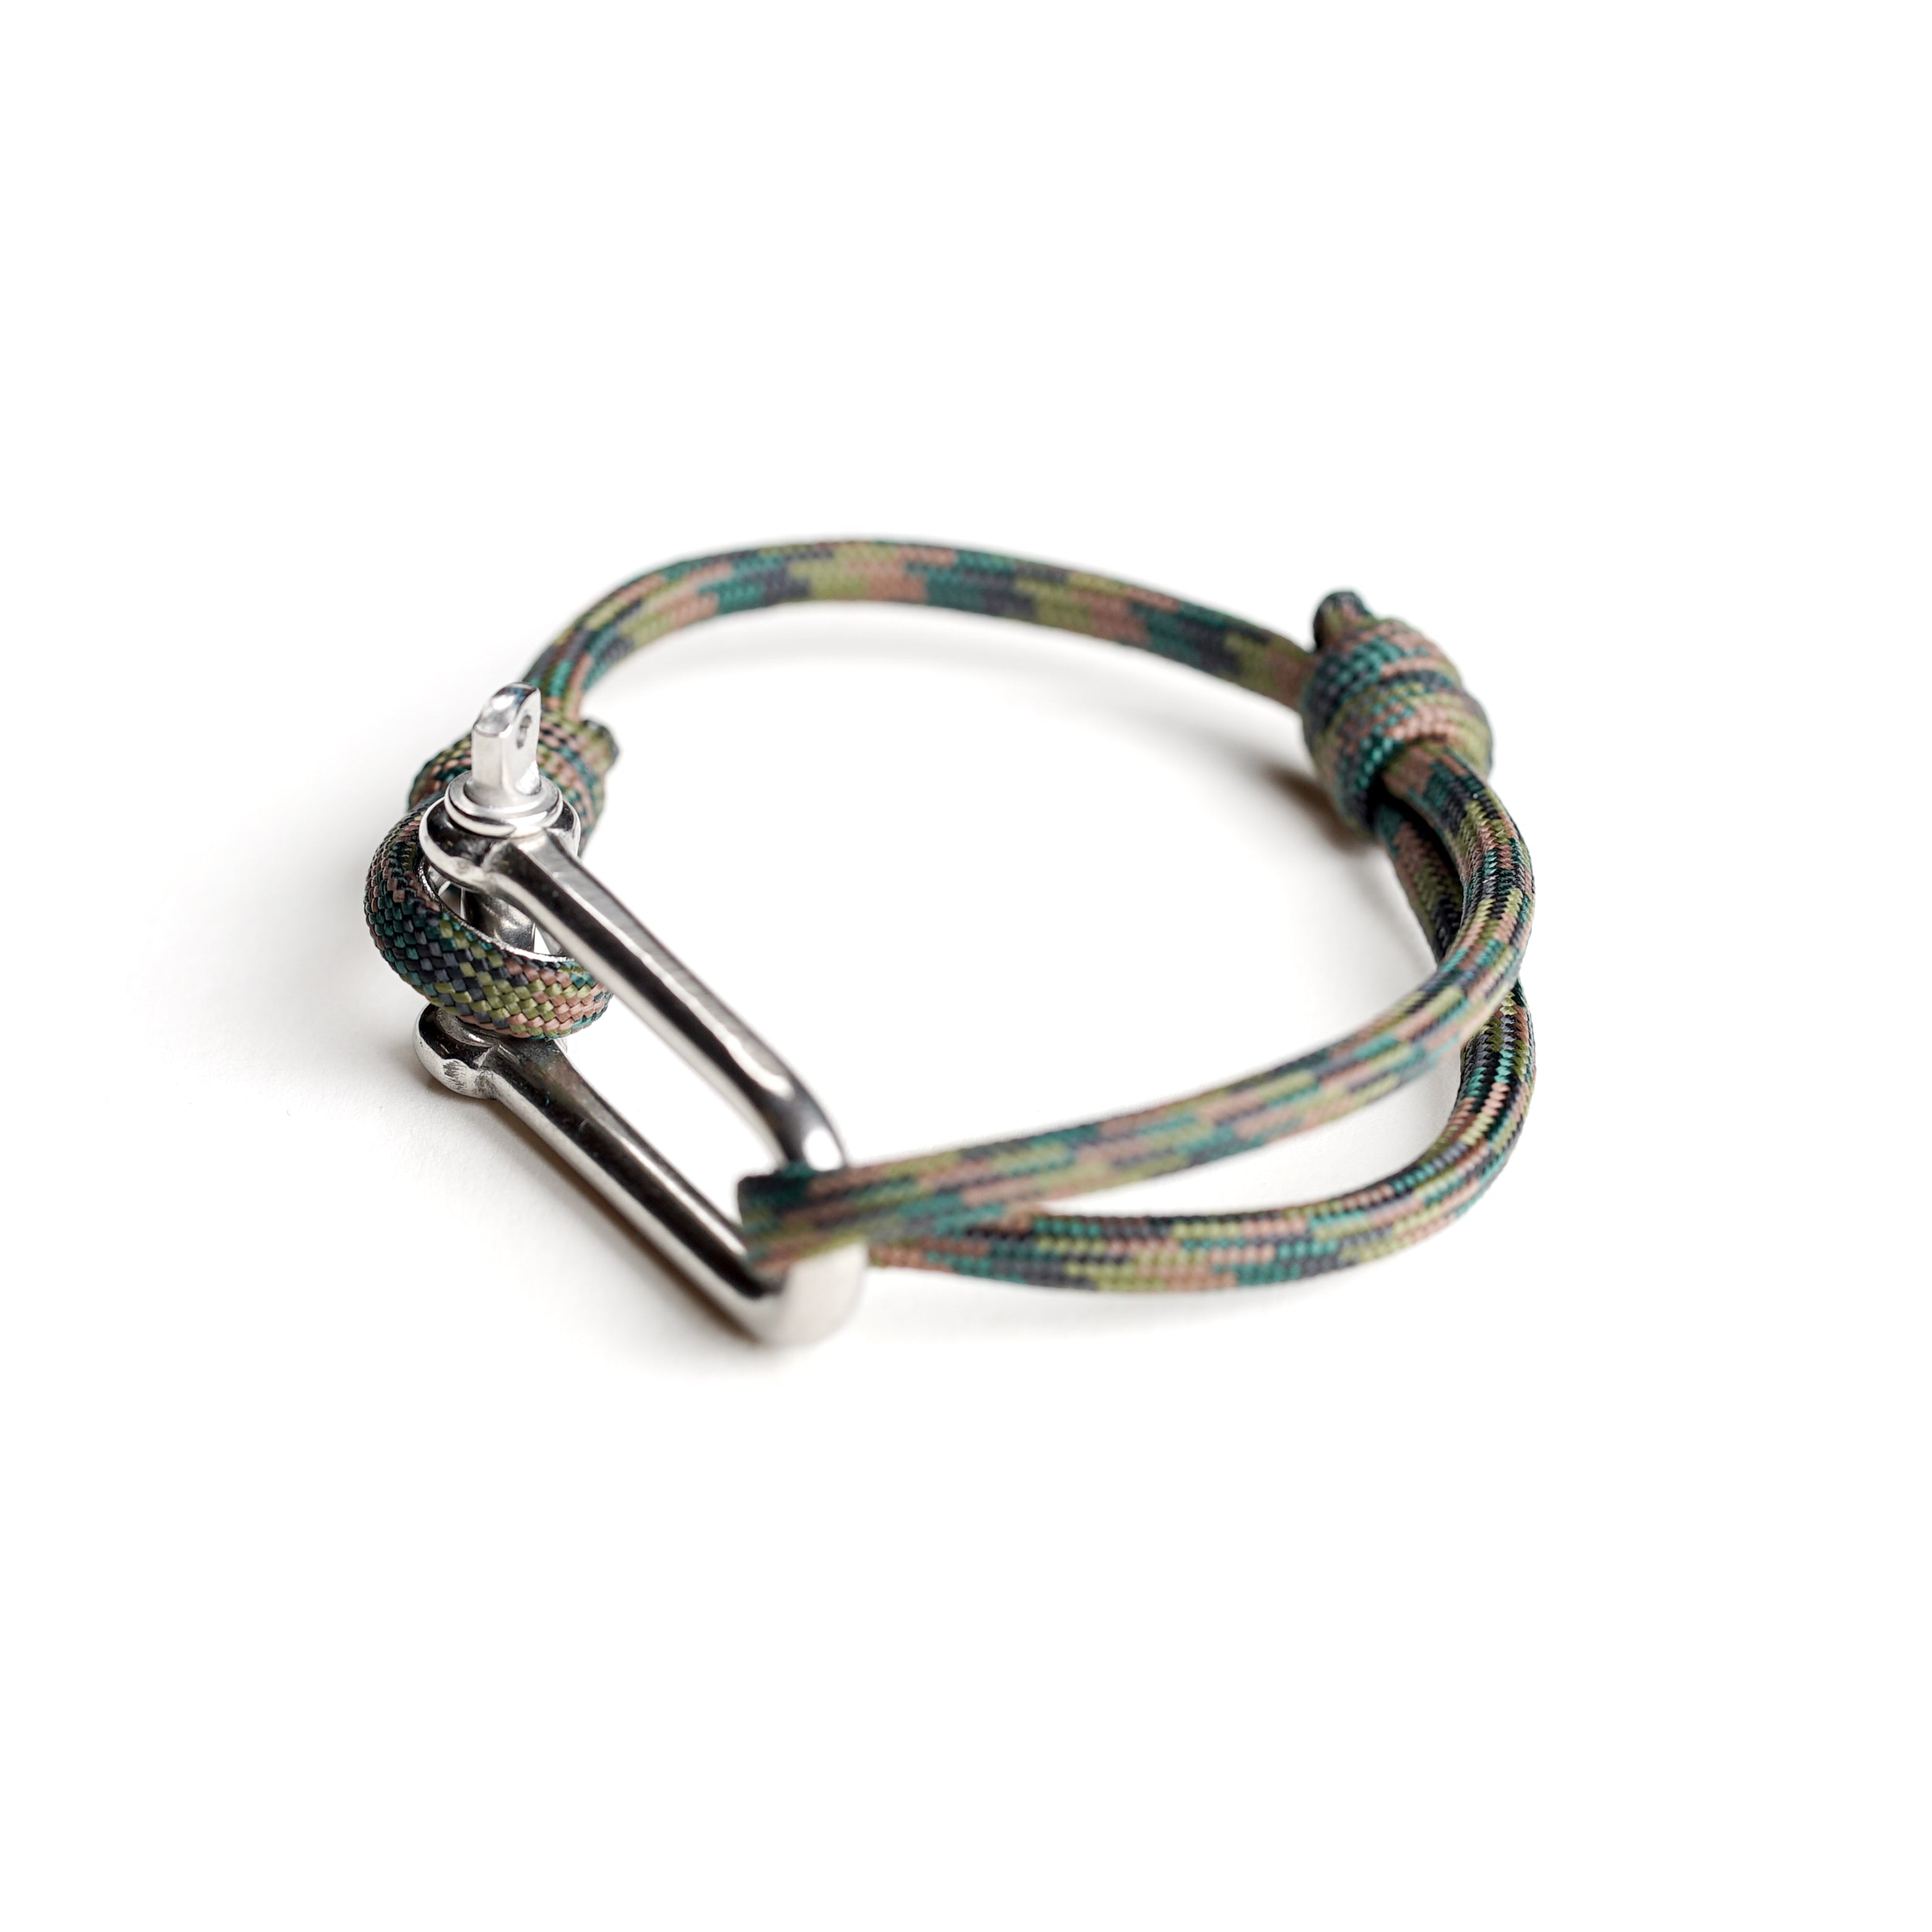 Paracord Nautical Bracelet with Stainless Steel Shackle - Green Camo